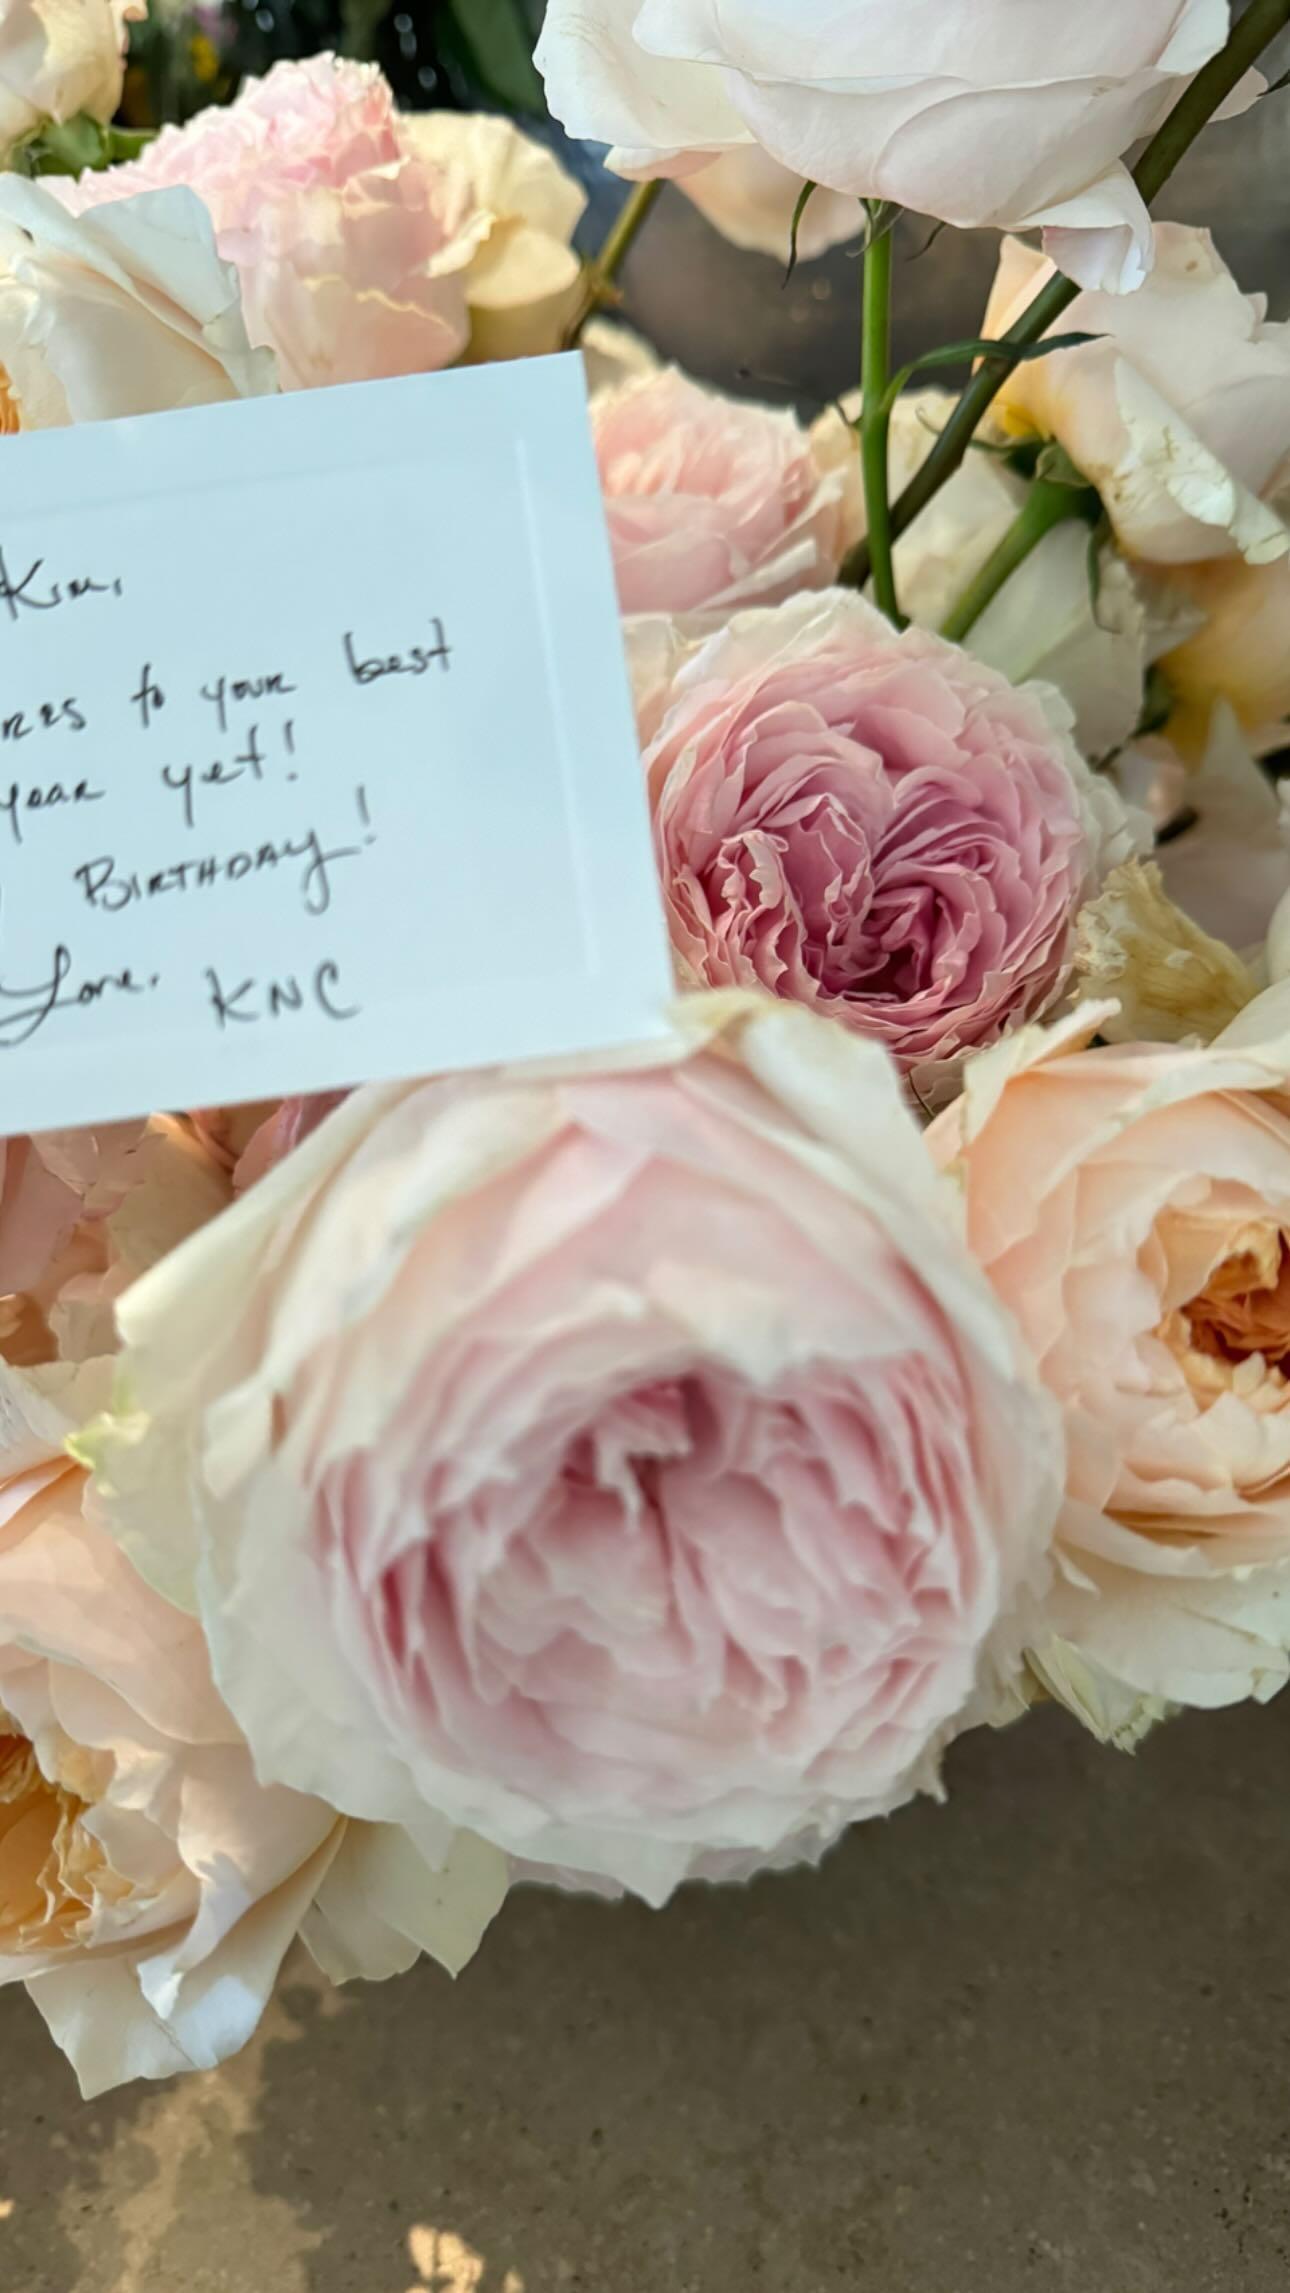 Kim Kardashian's Birthday Blooms Take Over IG: 15 Ridiculous Flower Pics You Can't Miss!